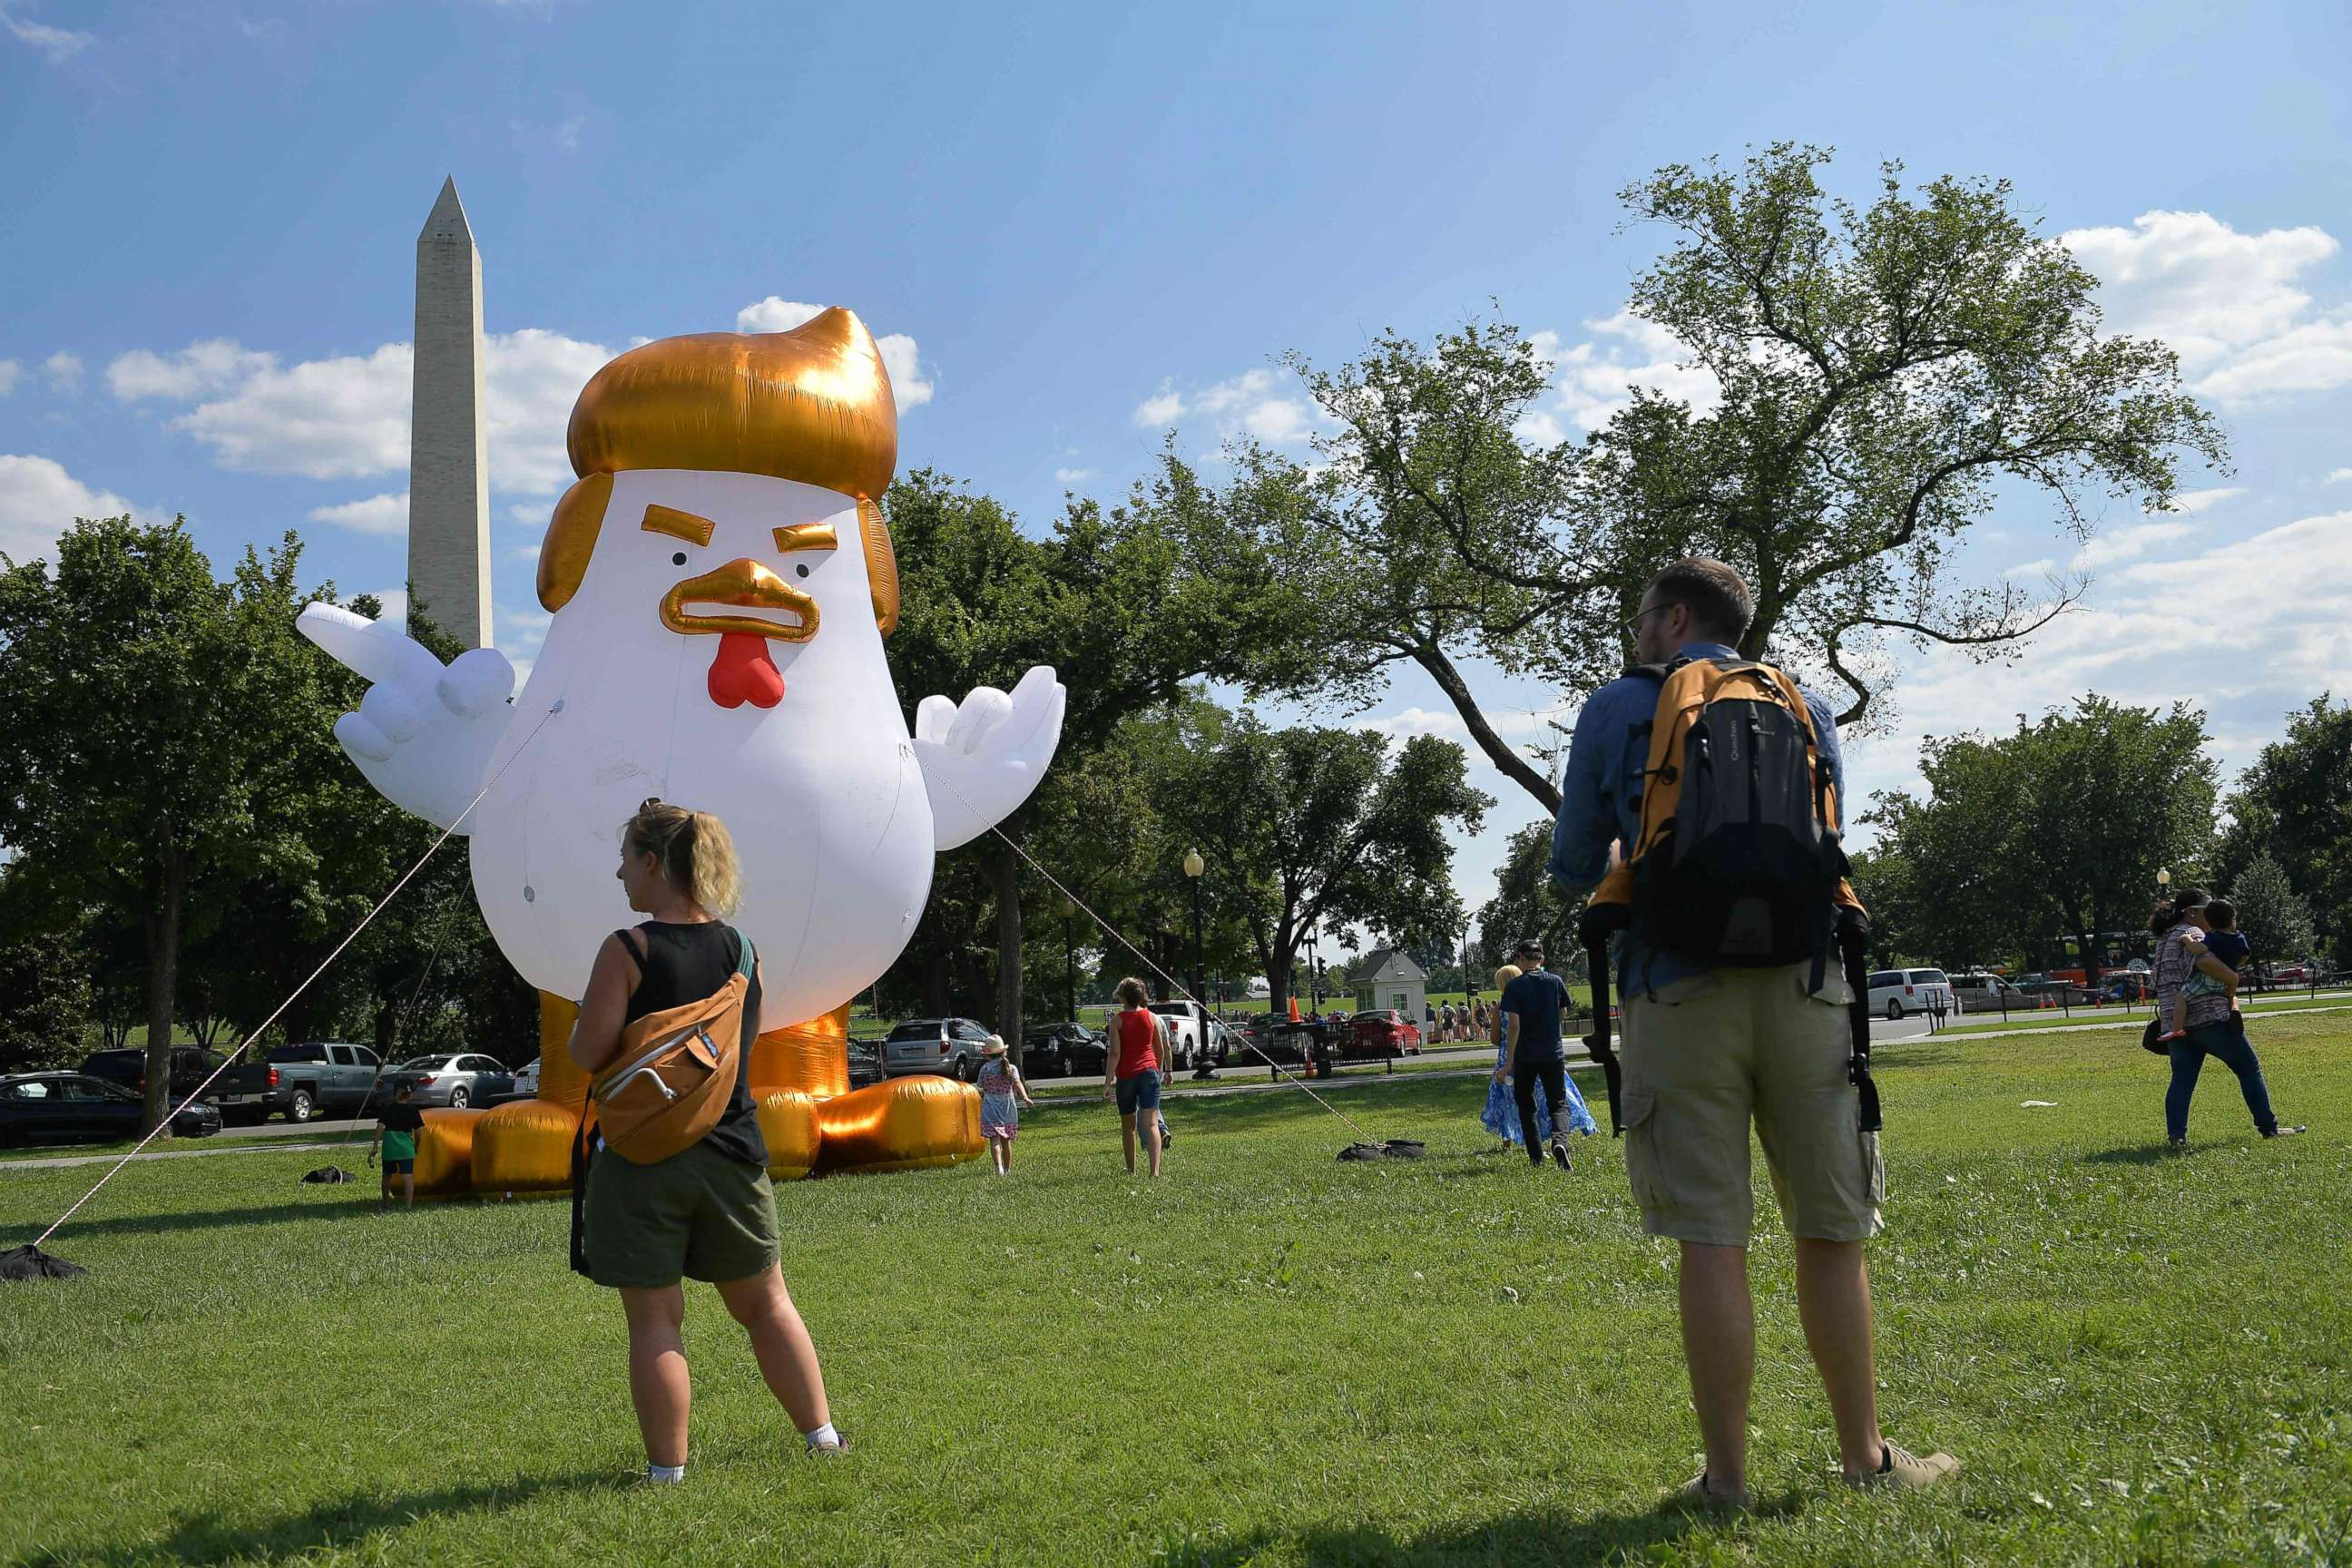 PHOTO: An inflatable chicken mimicking President Donald Trump is set up on The Ellipse,  located just south of the White House and north of the Washington Monument, Aug. 9, 2017.